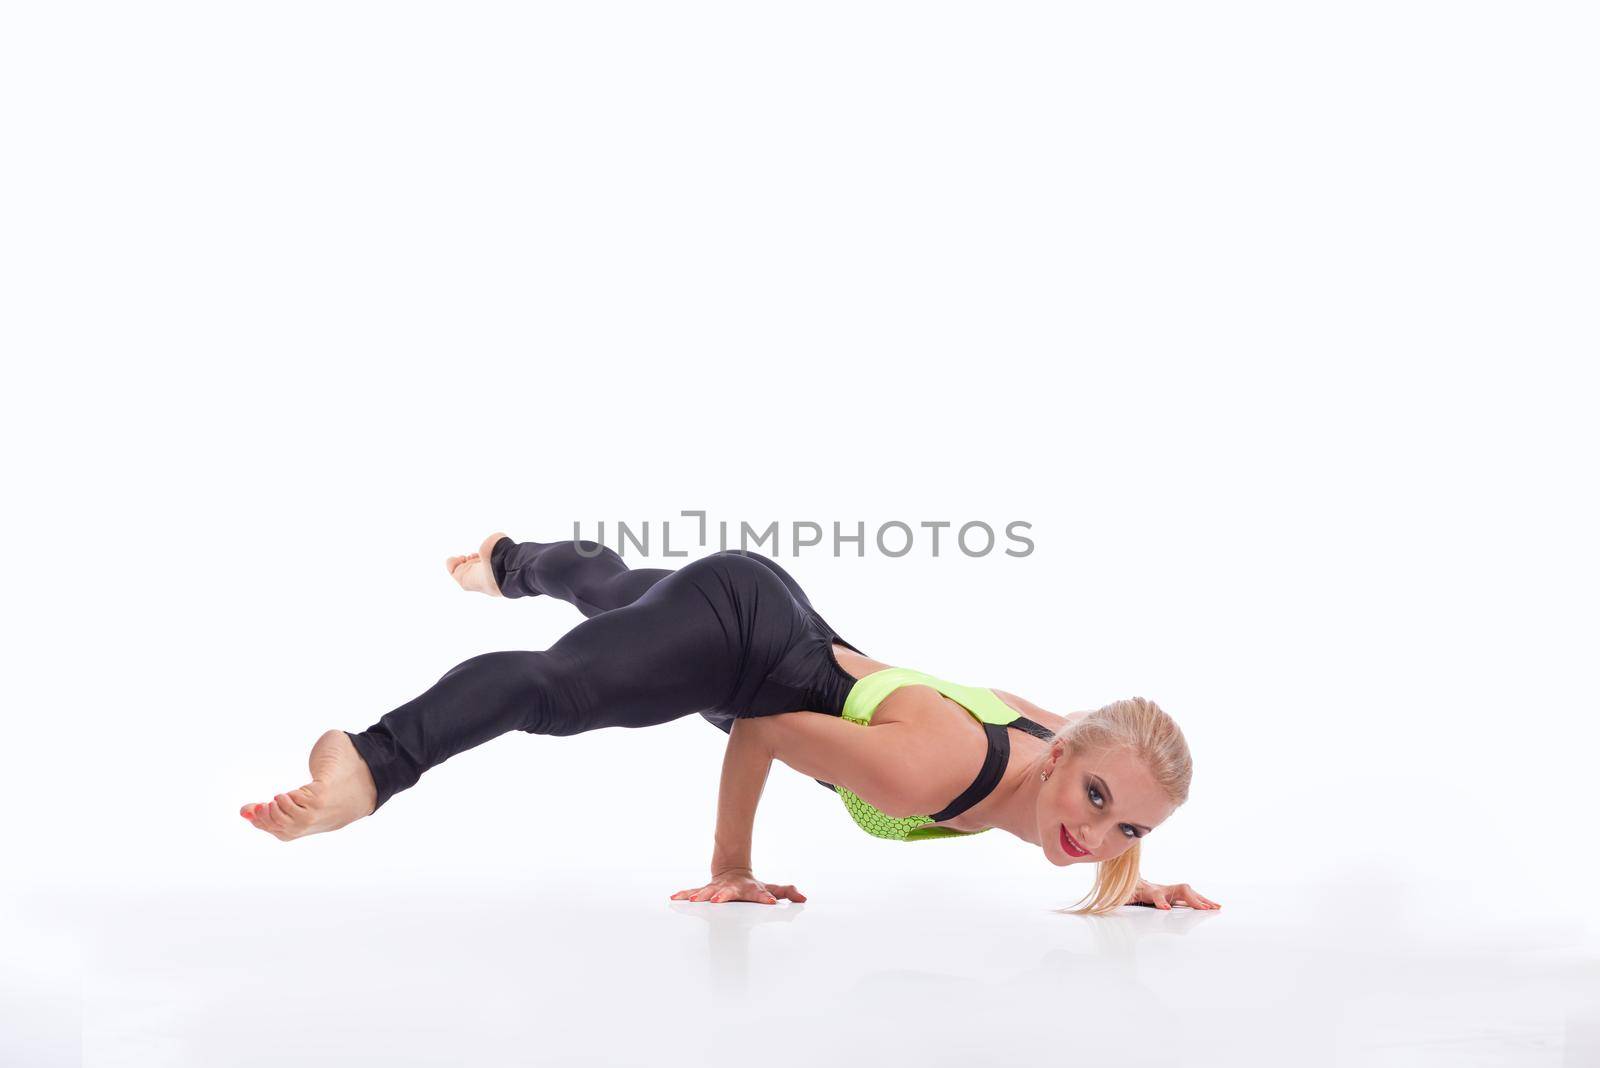 Attractive female gymnast exercising at studio by SerhiiBobyk